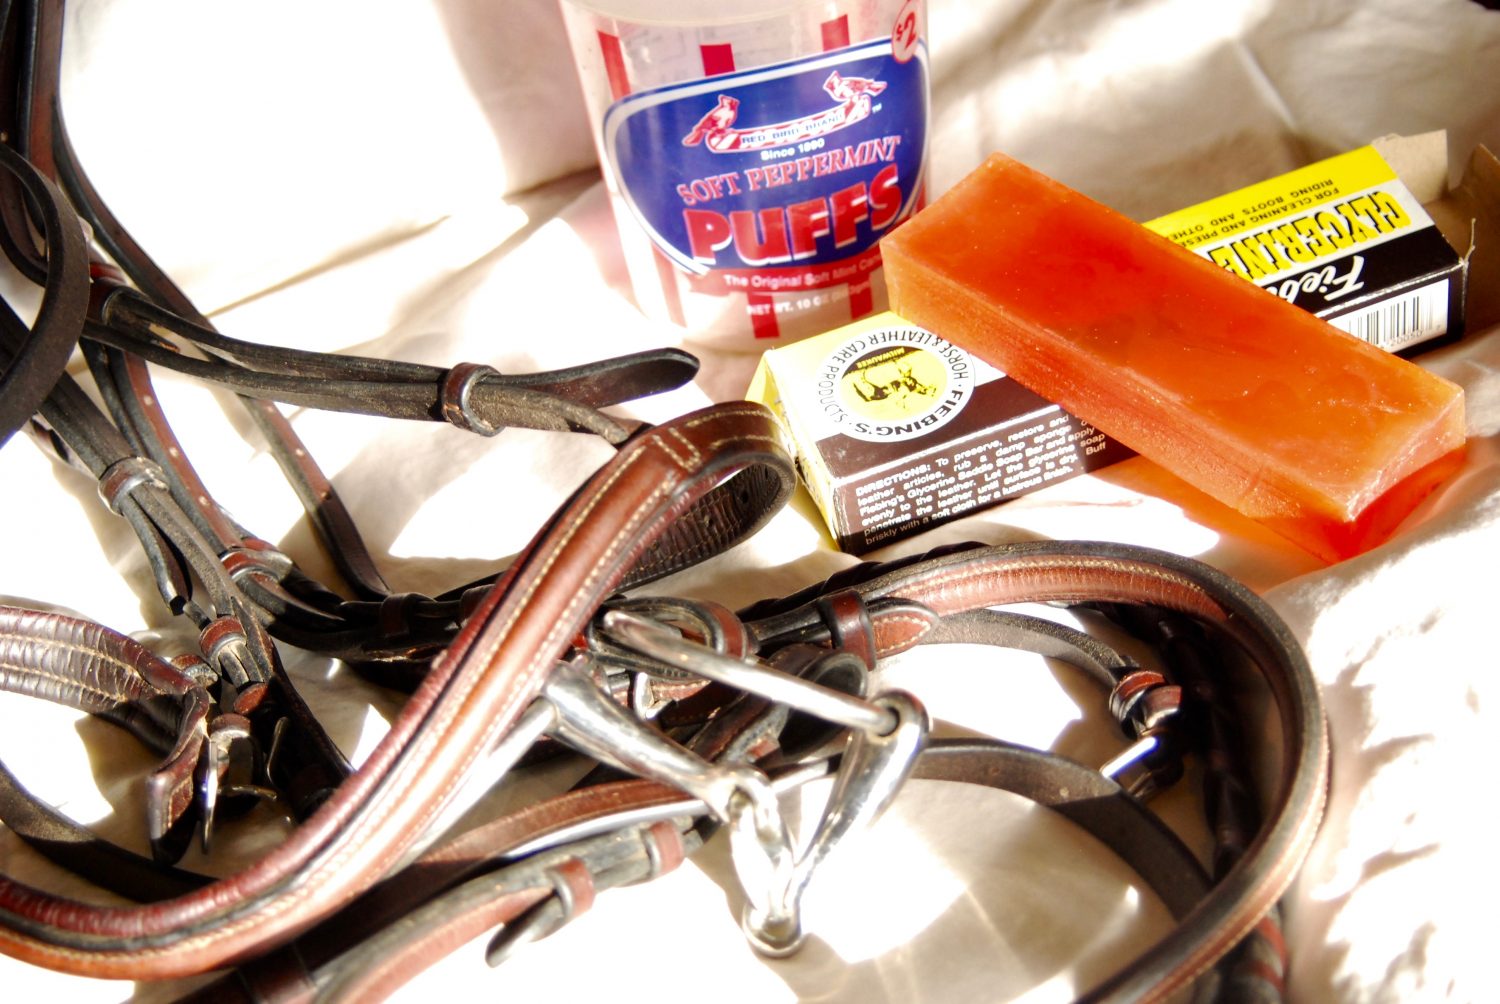 Cleaning horse tack: How often should it be done?